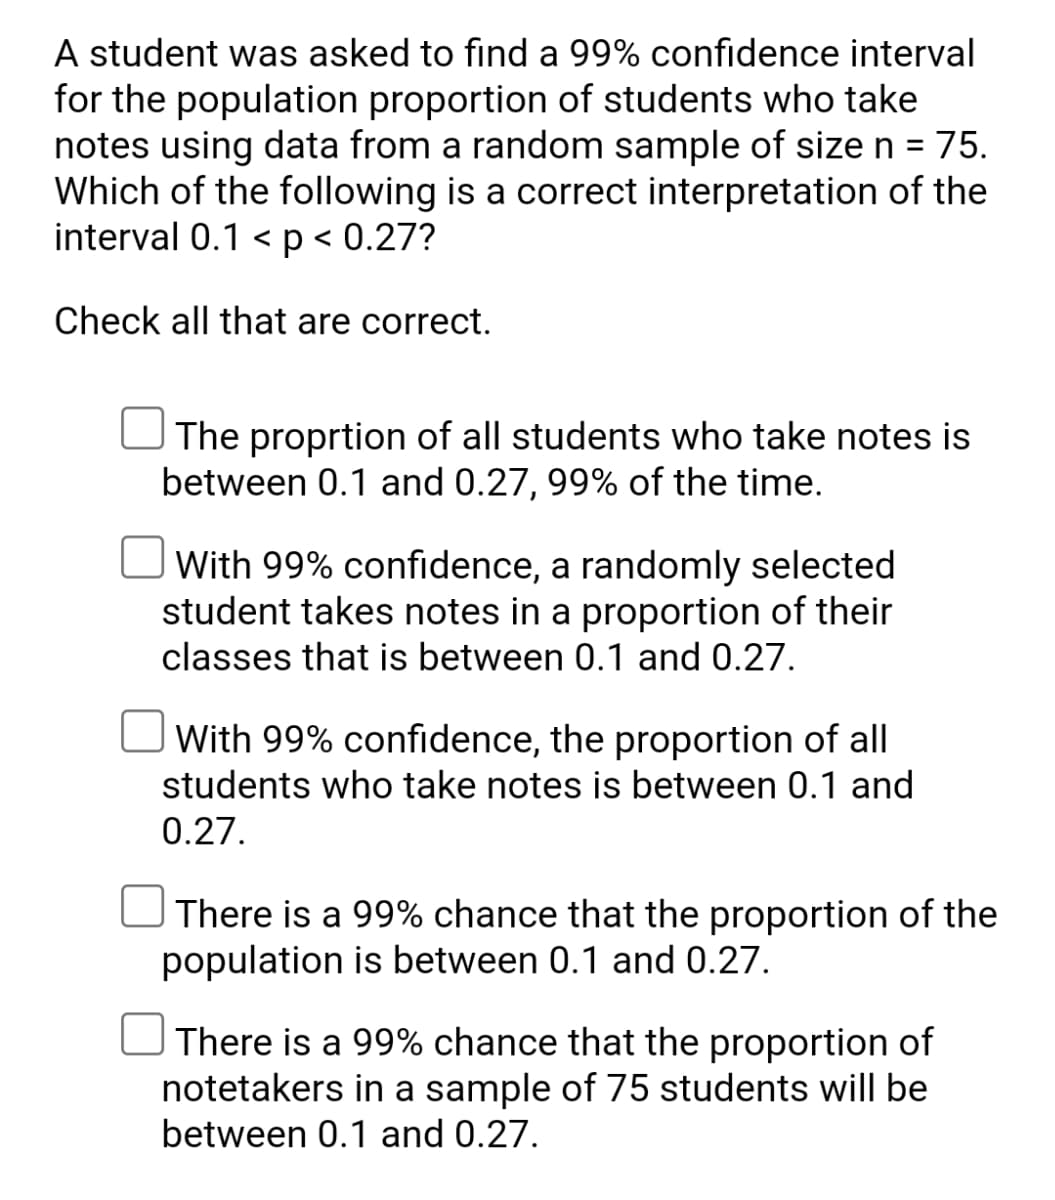 A student was asked to find a 99% confidence interval
for the population proportion of students who take
notes using data from a random sample of size n =
Which of the following is a correct interpretation of the
interval 0.1 < p < 0.27?
75.
Check all that are correct.
| The proprtion of all students who take notes is
between 0.1 and 0.27, 99% of the time.
With 99% confidence, a randomly selected
student takes notes in a proportion of their
classes that is between 0.1 and 0.27.
With 99% confidence, the proportion of all
students who take notes is between 0.1 and
0.27.
There is a 99% chance that the proportion of the
population is between 0.1 and 0.27.
There is a 99% chance that the proportion of
notetakers in a sample of 75 students will be
between 0.1 and 0.27.
